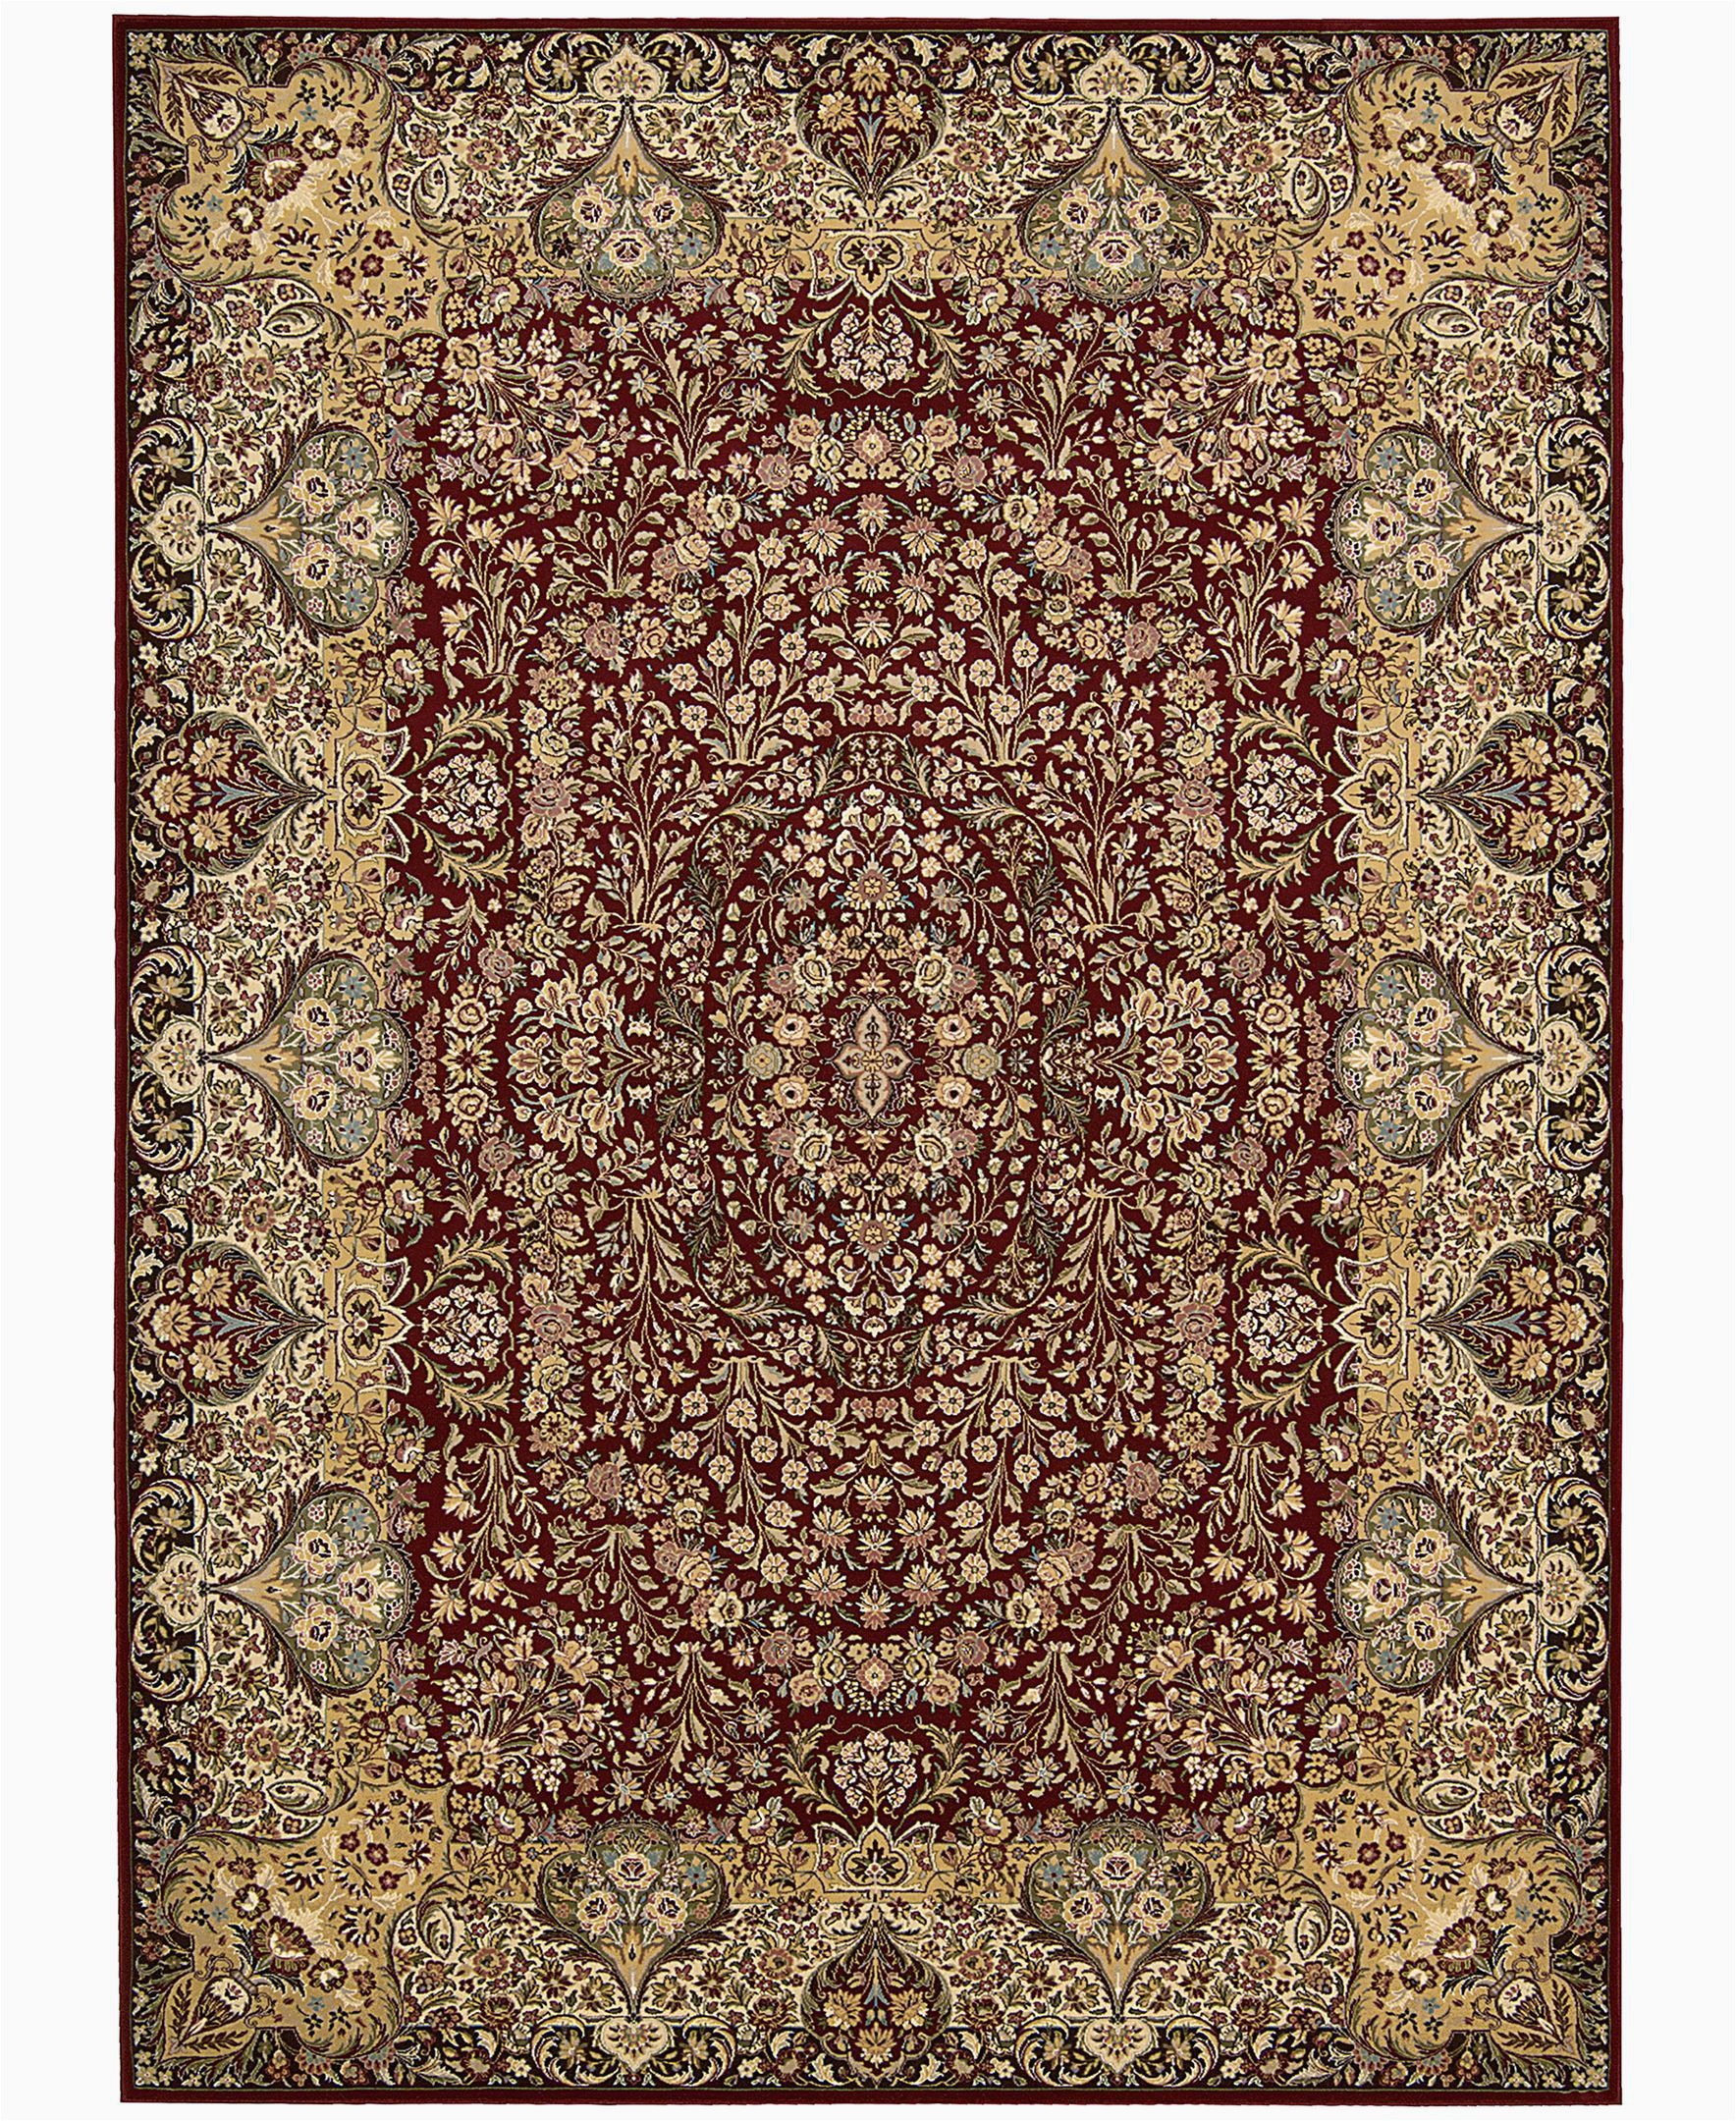 5 by 9 area Rugs Home Antiquities Stately Empire Burgundy 3 9 X 5 9 area Rug